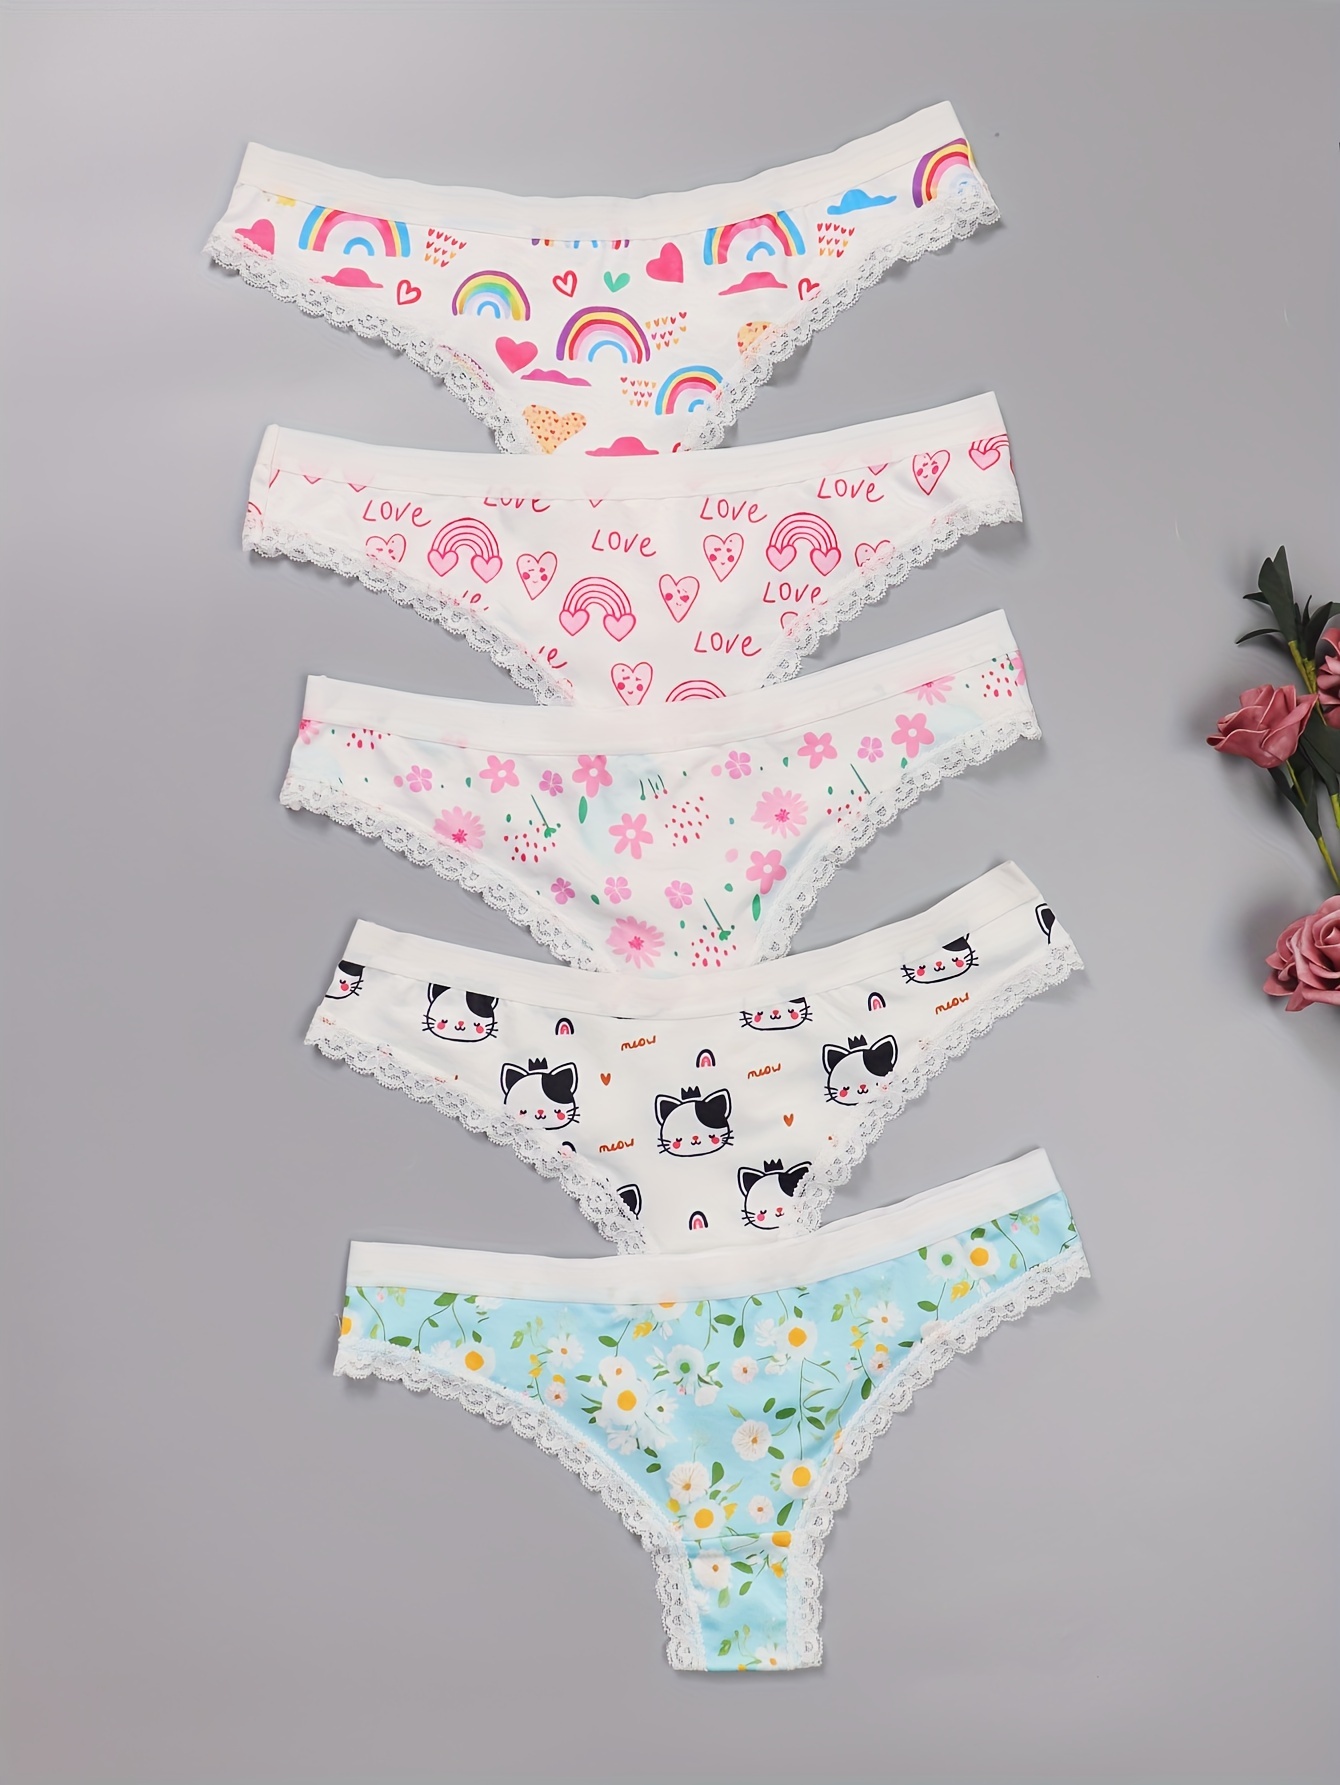 5 Pcs Contrast Lace Thongs, Cute Heart & Floral Stretchy Intimates Panties,  Women's Lingerie & Underwear